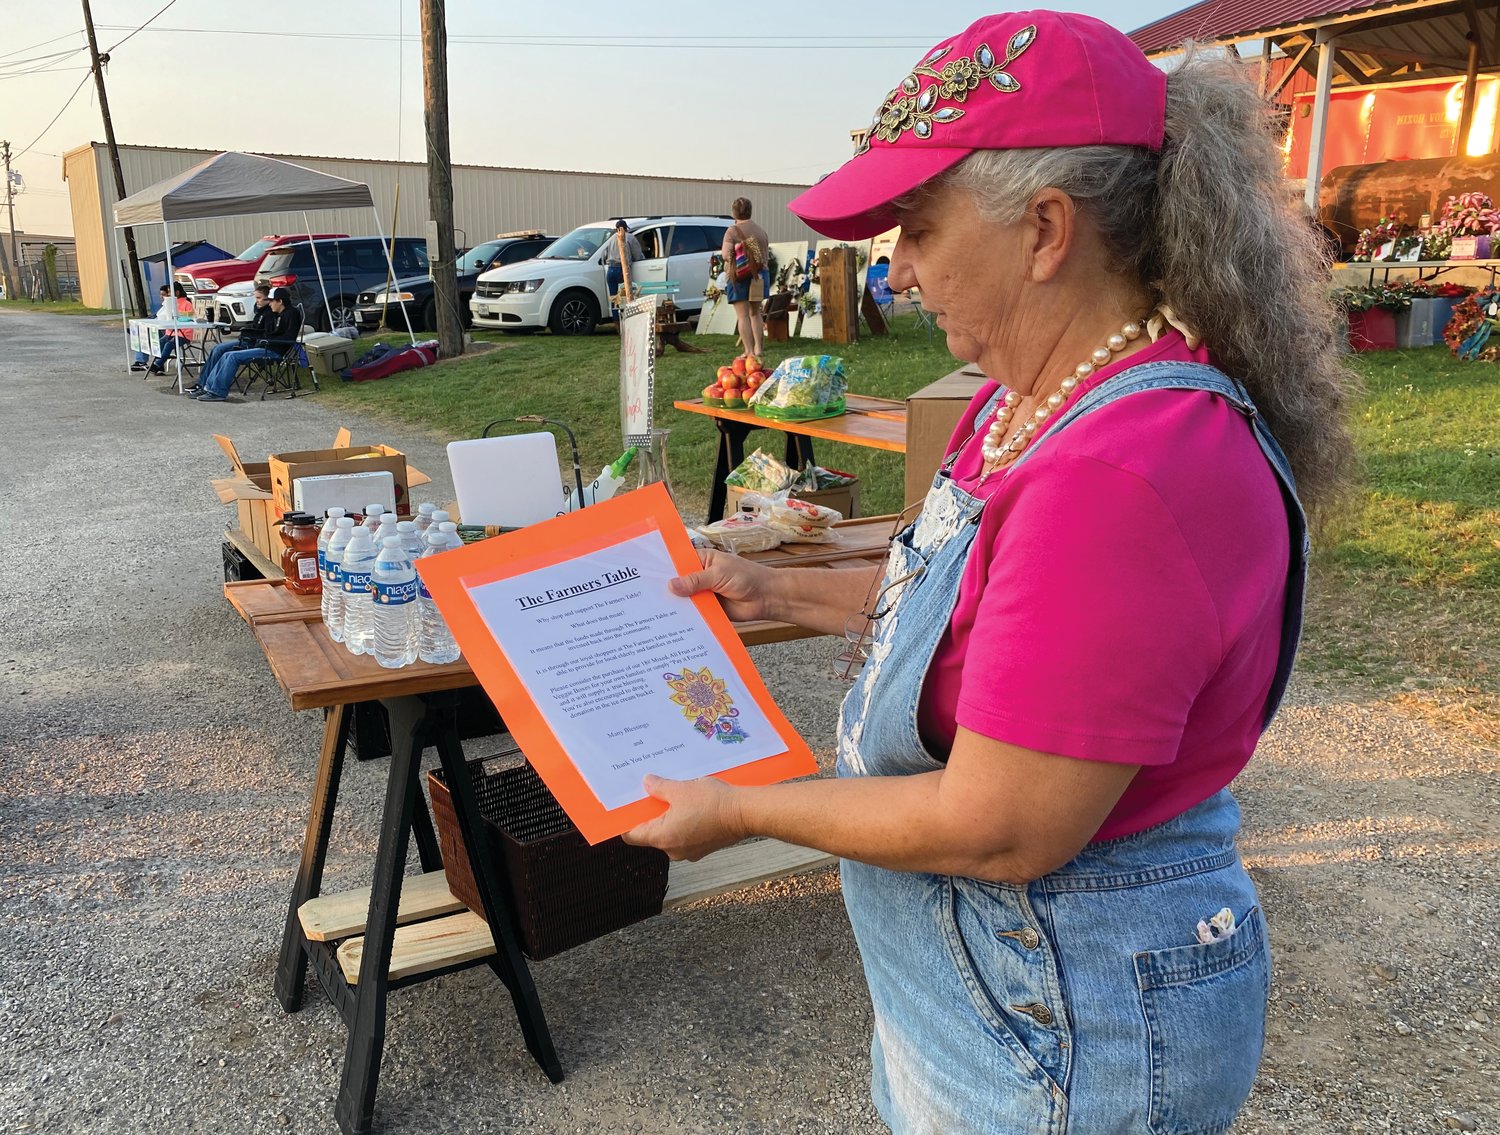 The Farmers Table owner Renee Trip shared her business’s mission, which is to bring affordable produce to areas such as Nixon, Pandora and Smiley.